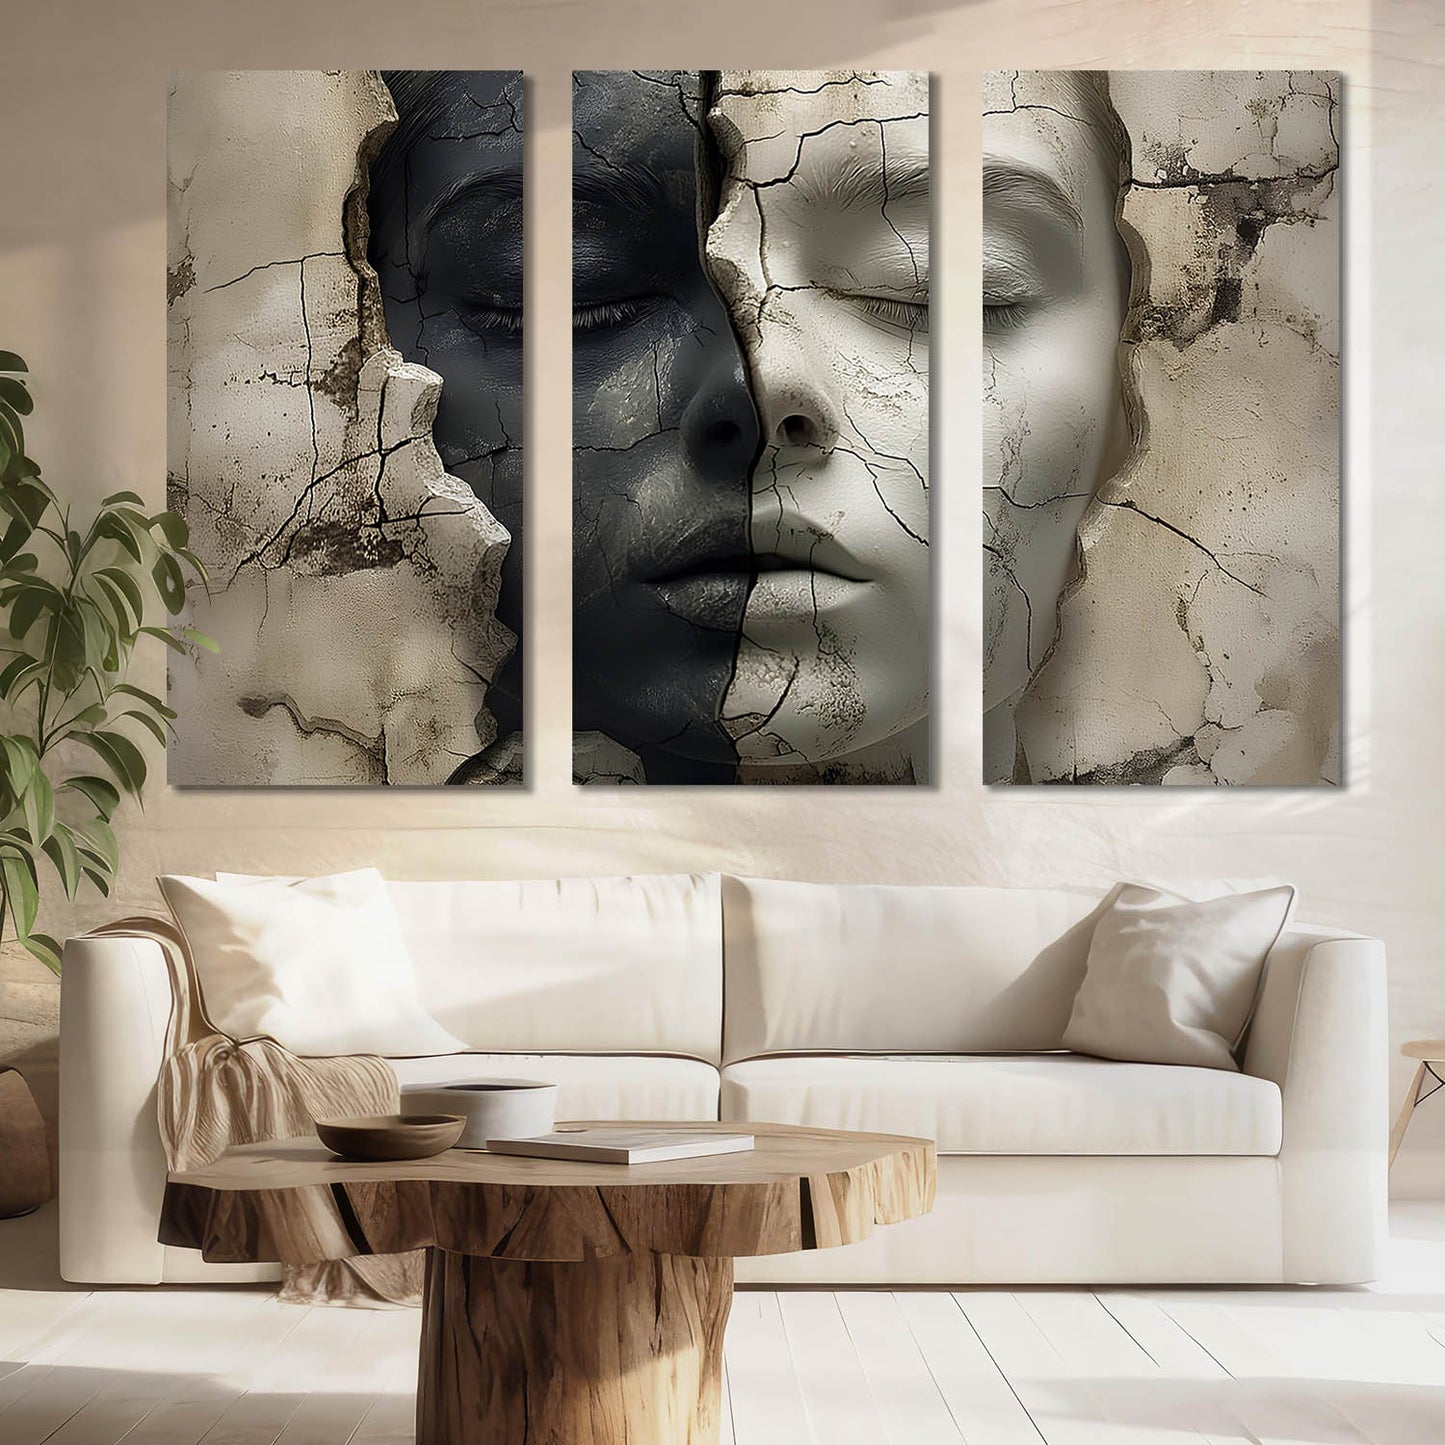 Modern Wall Art Canvas, Wall Print for Living Room Wall Decoration